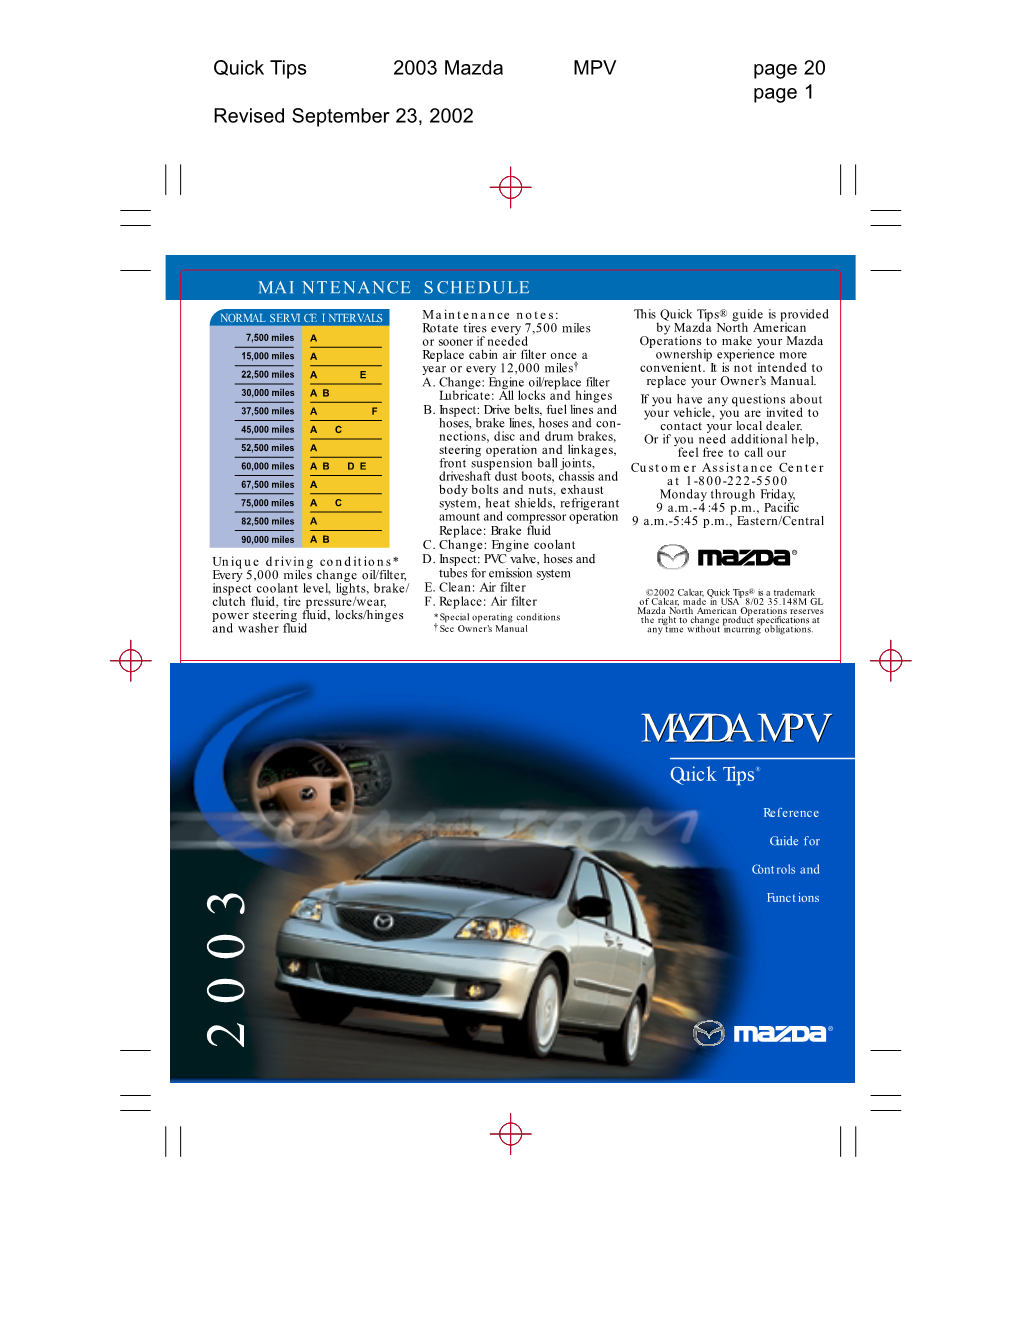 Mazda MPV Page 20 Page 1 Revised September 23, 2002